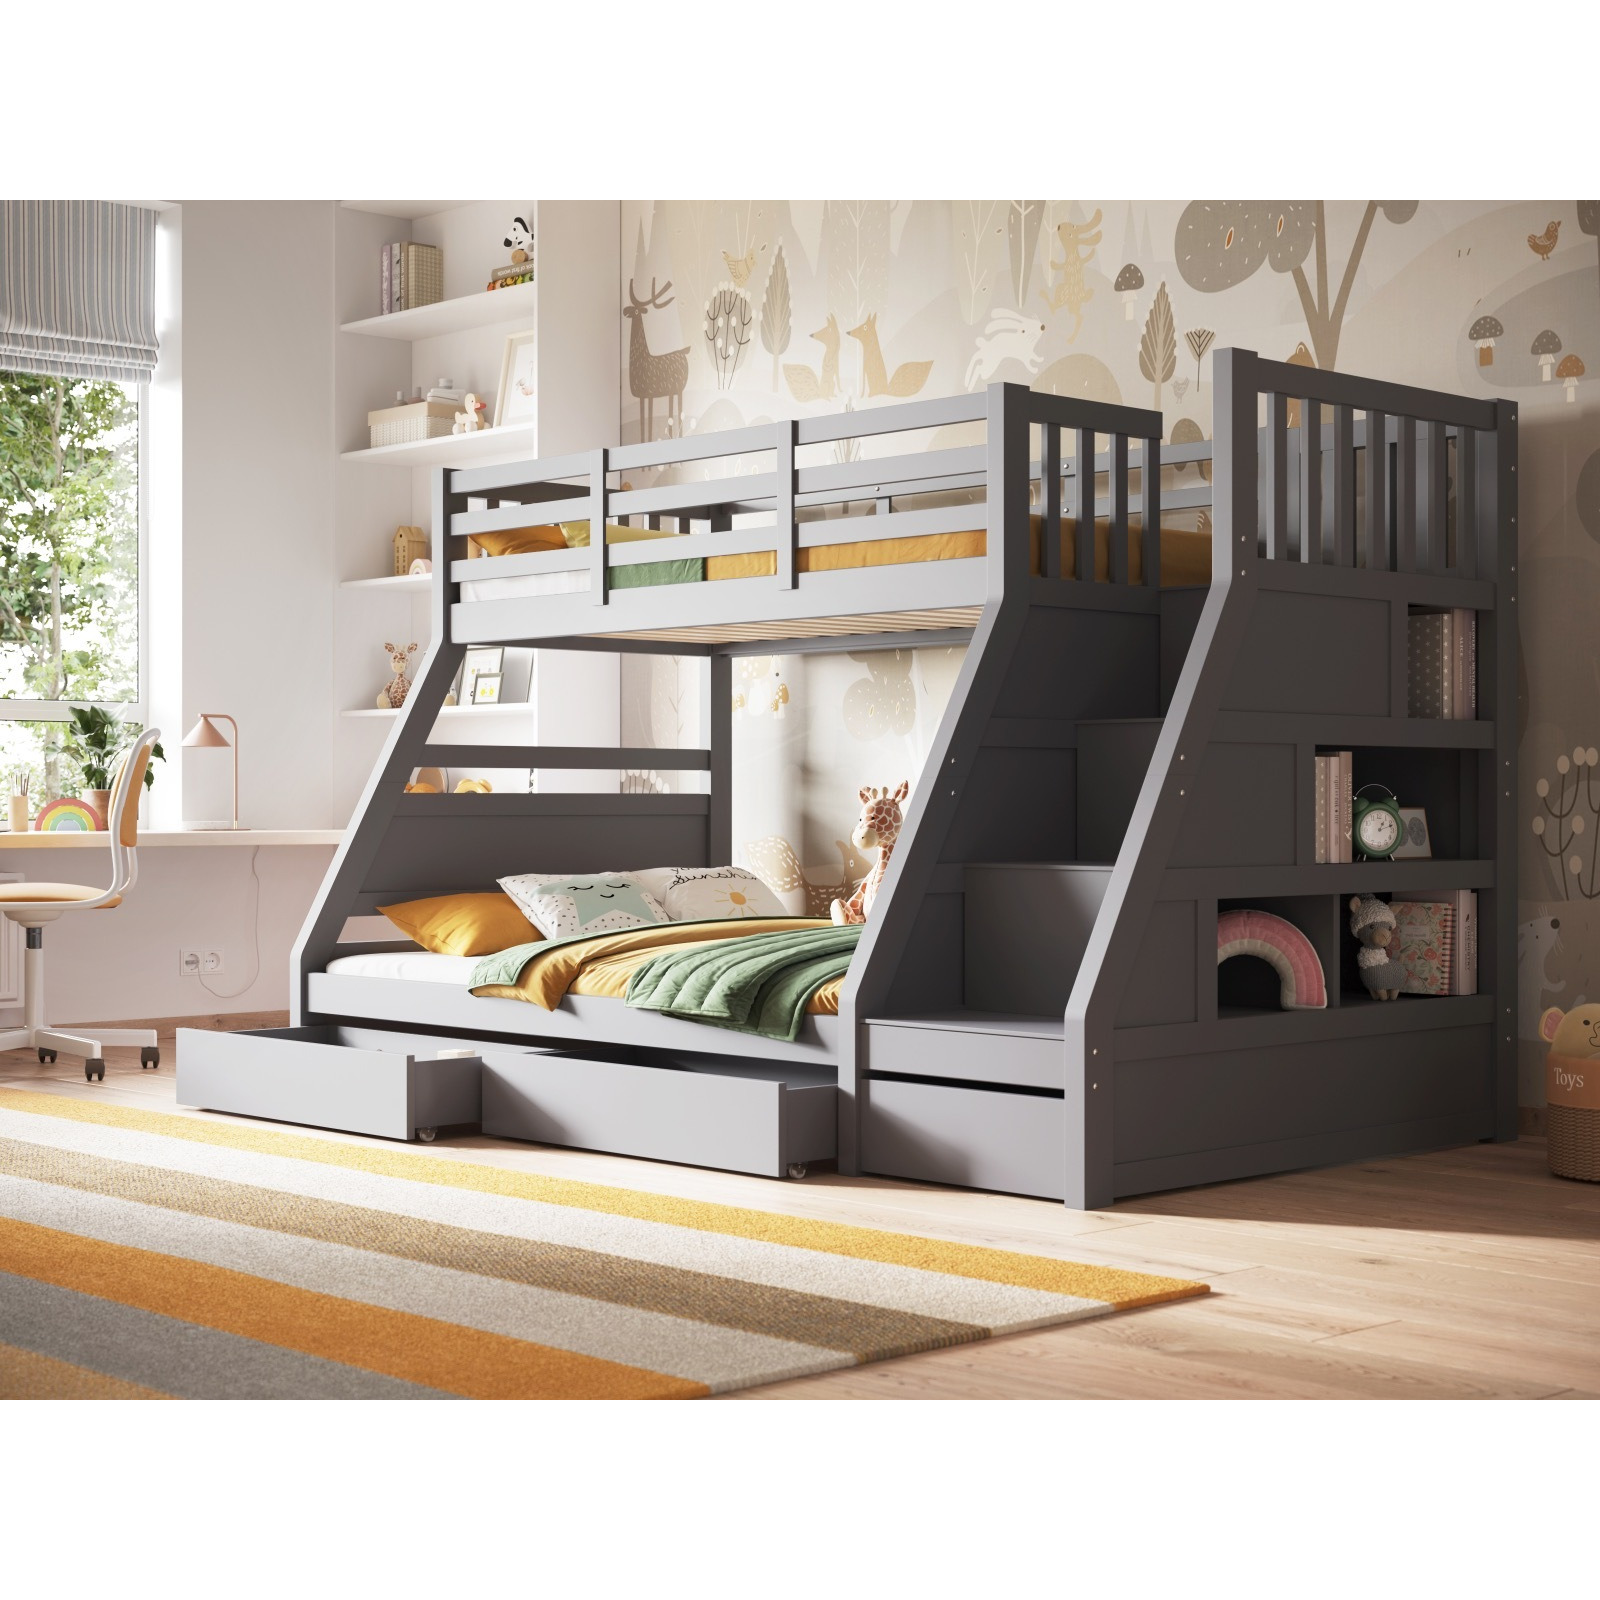 Flair Lunar Staircase Triple Bunk Bed with Shelves Grey - image 1